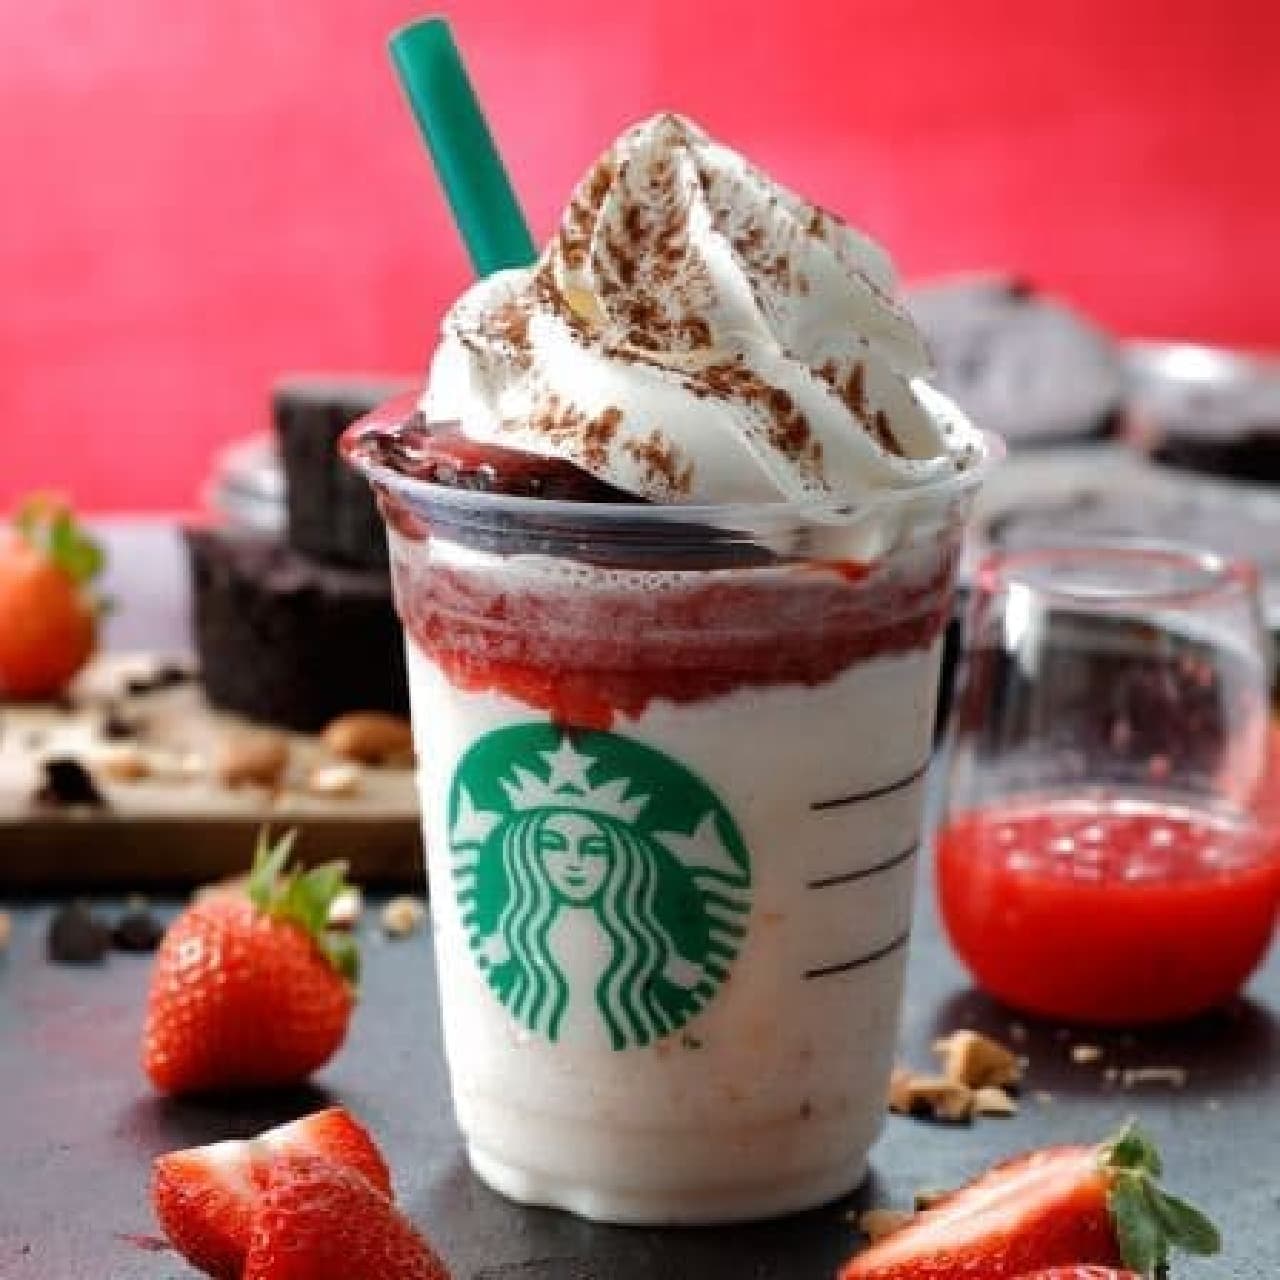 Chocolate cake top Frappuccino with strawberry shot